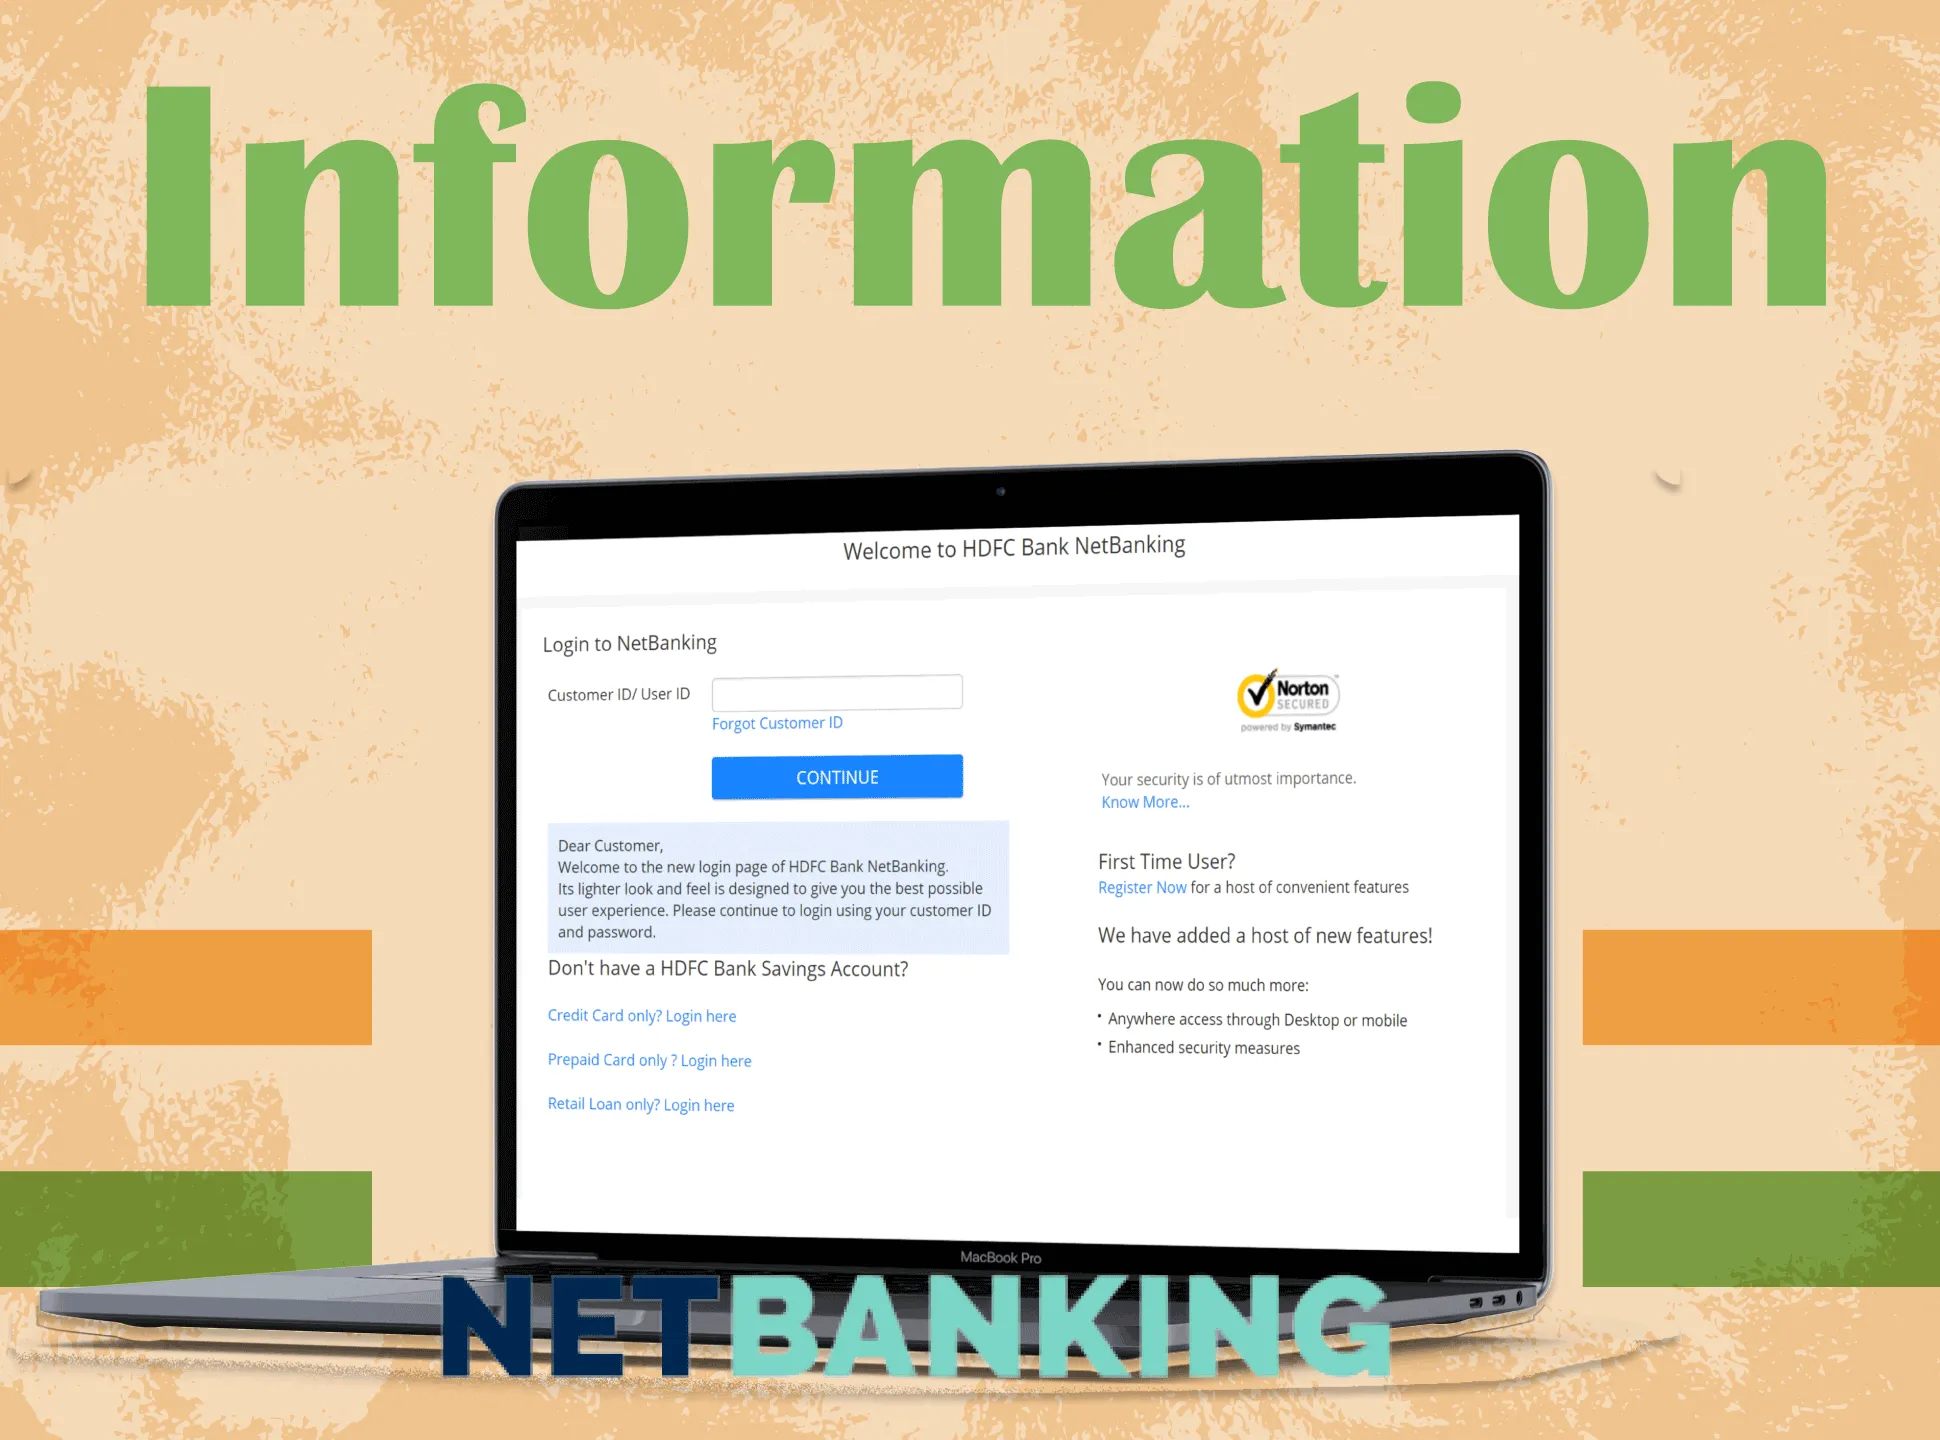 NetBanking allows making all the payments and money transactions online.